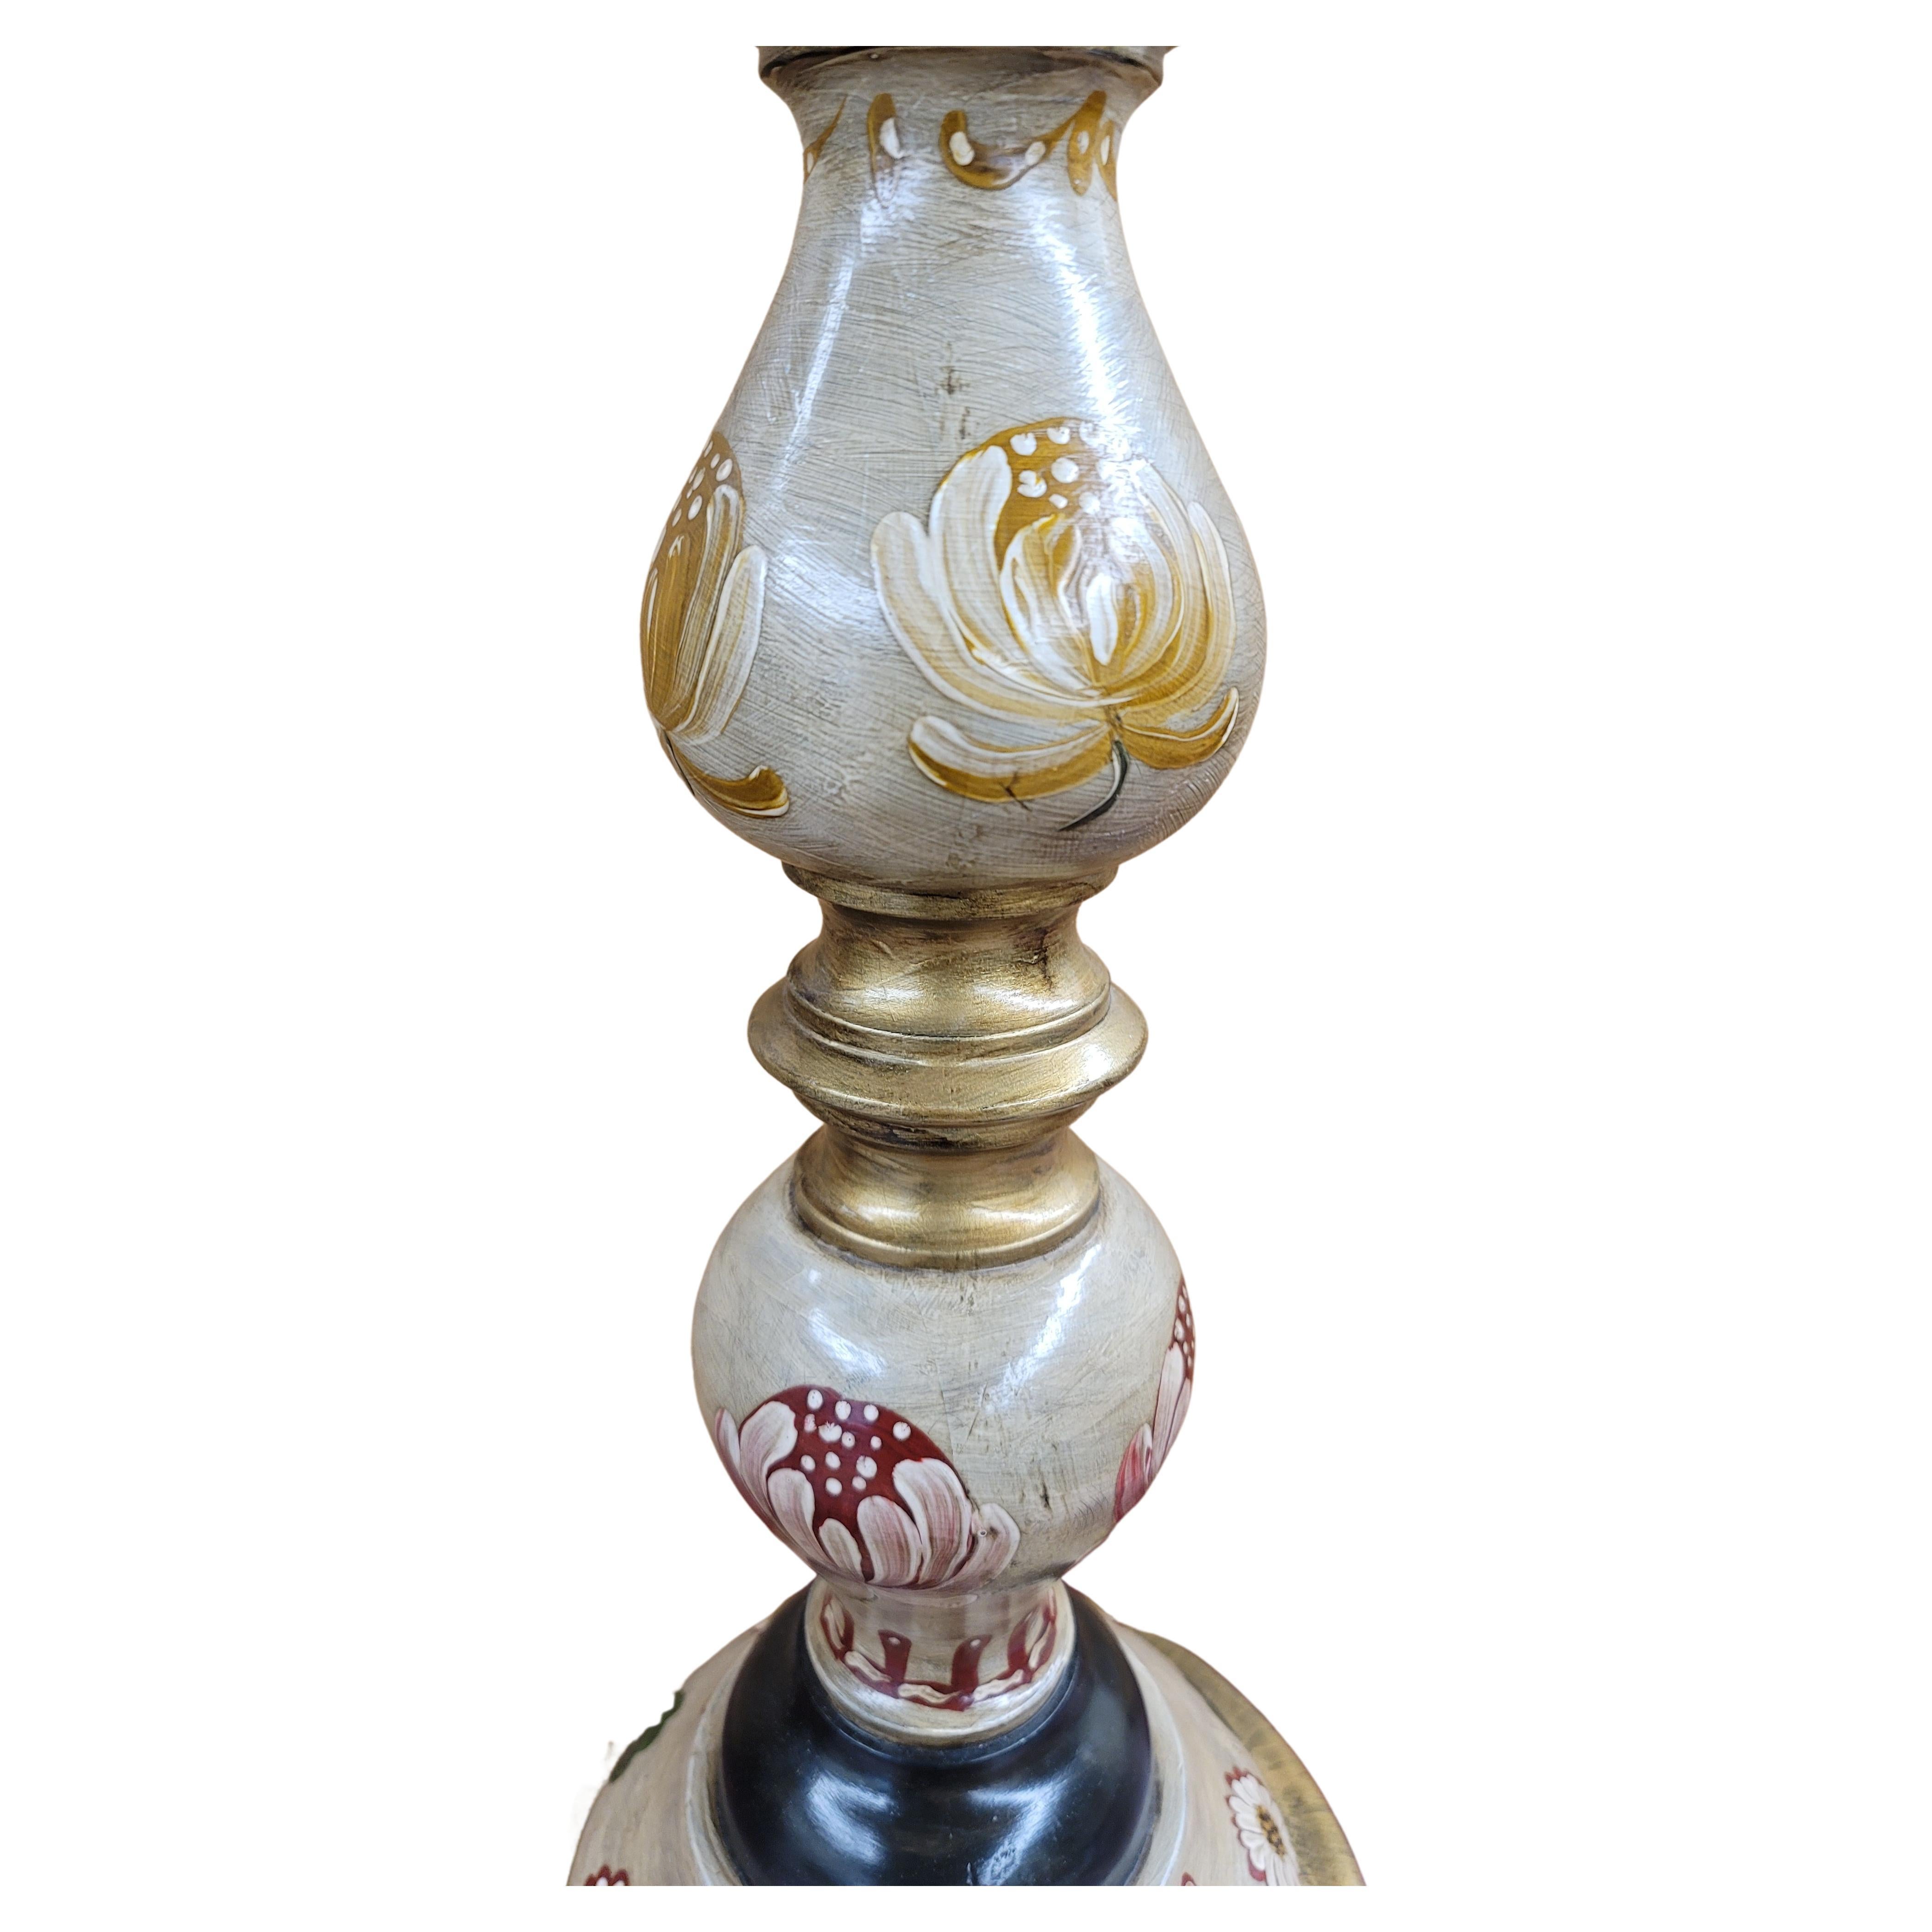 40inches tall German wooden Pillar candlestick originally purchased when exposed at the US Embassy in Germany in 1981. Hand painted and Decorated by Artist Ellen McKibben Johnson in 2004. Painting depicting rose buds, yellow mums, red mums and